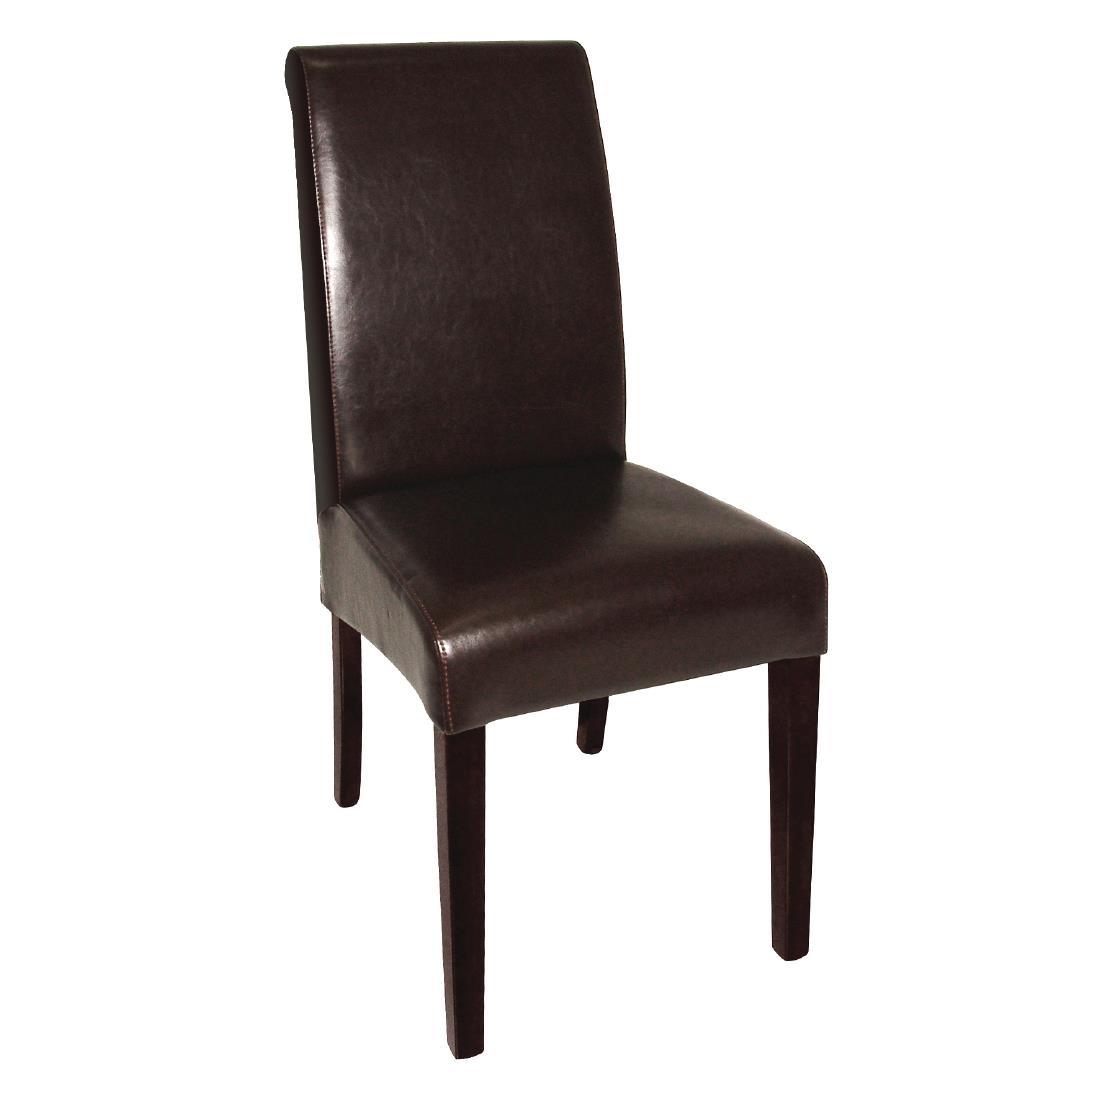 Bolero Curved Back Leather Chairs Dark Brown (Pack of 2) - GF956  - 1